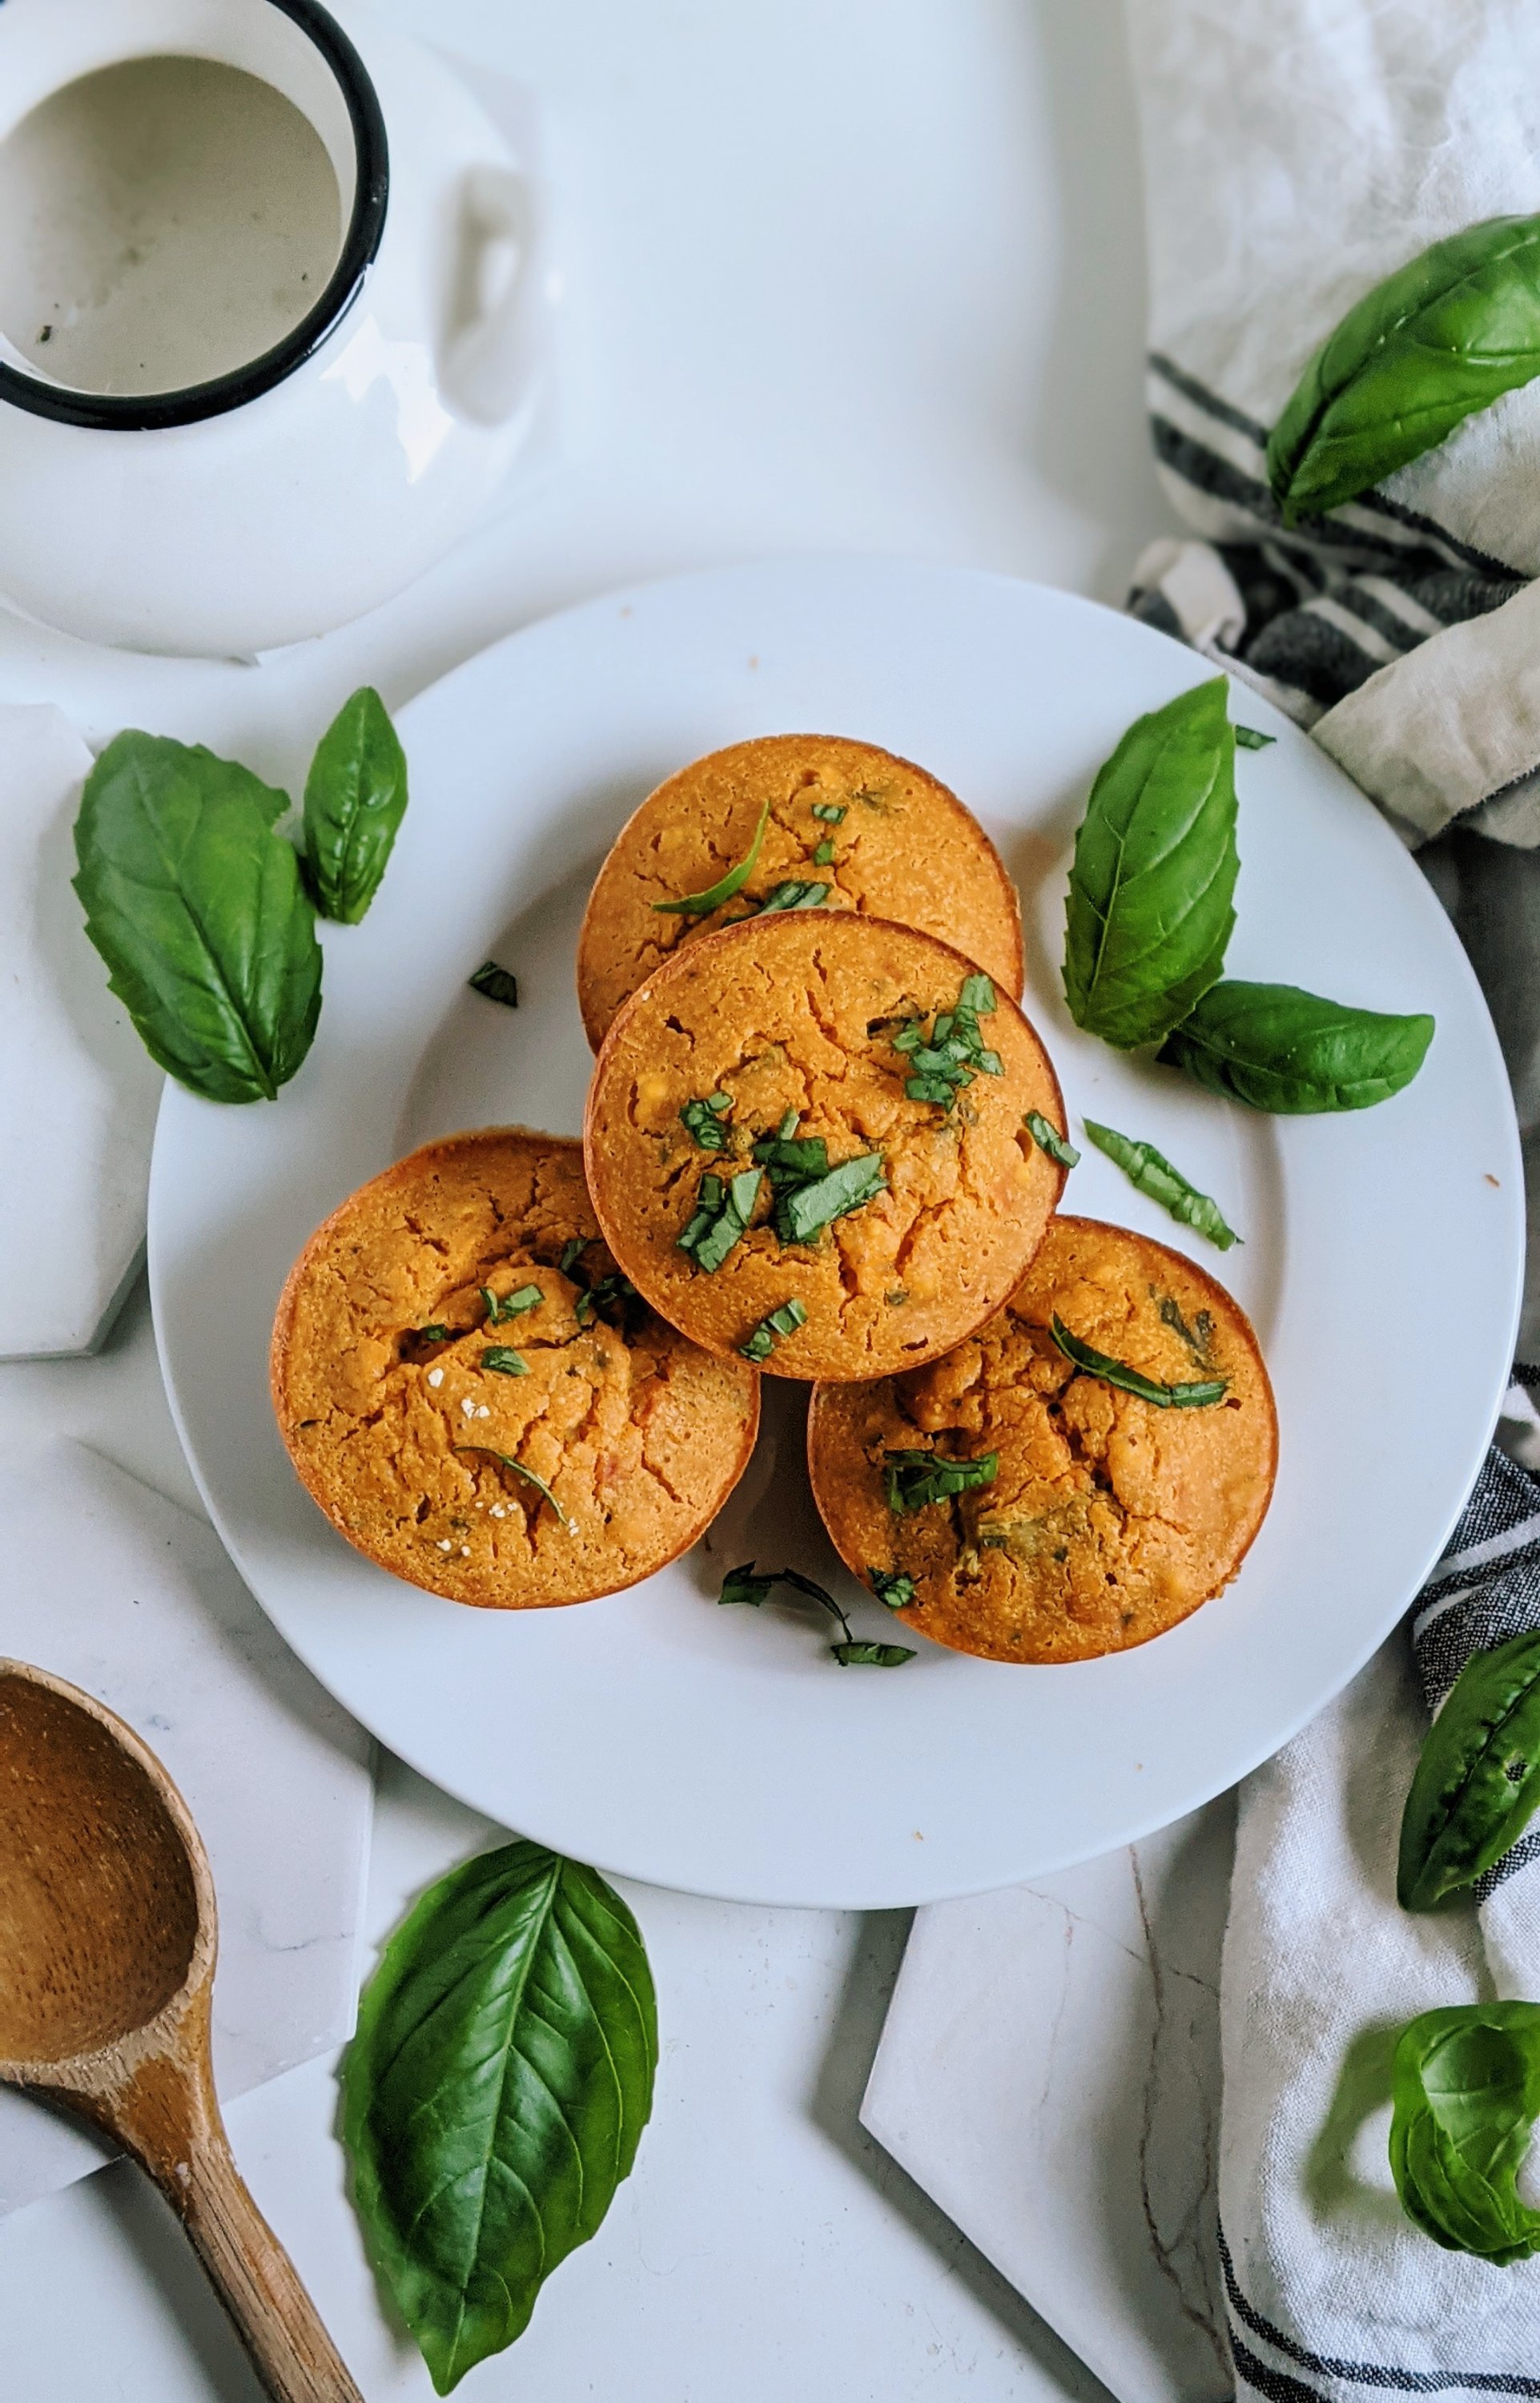 gluten free savory muffins tomato basil chickpea flour vegan grain free baking recipes high vegan protein breakfasts healthy make ahead breakfast recipes and ideas for school or work office on the go